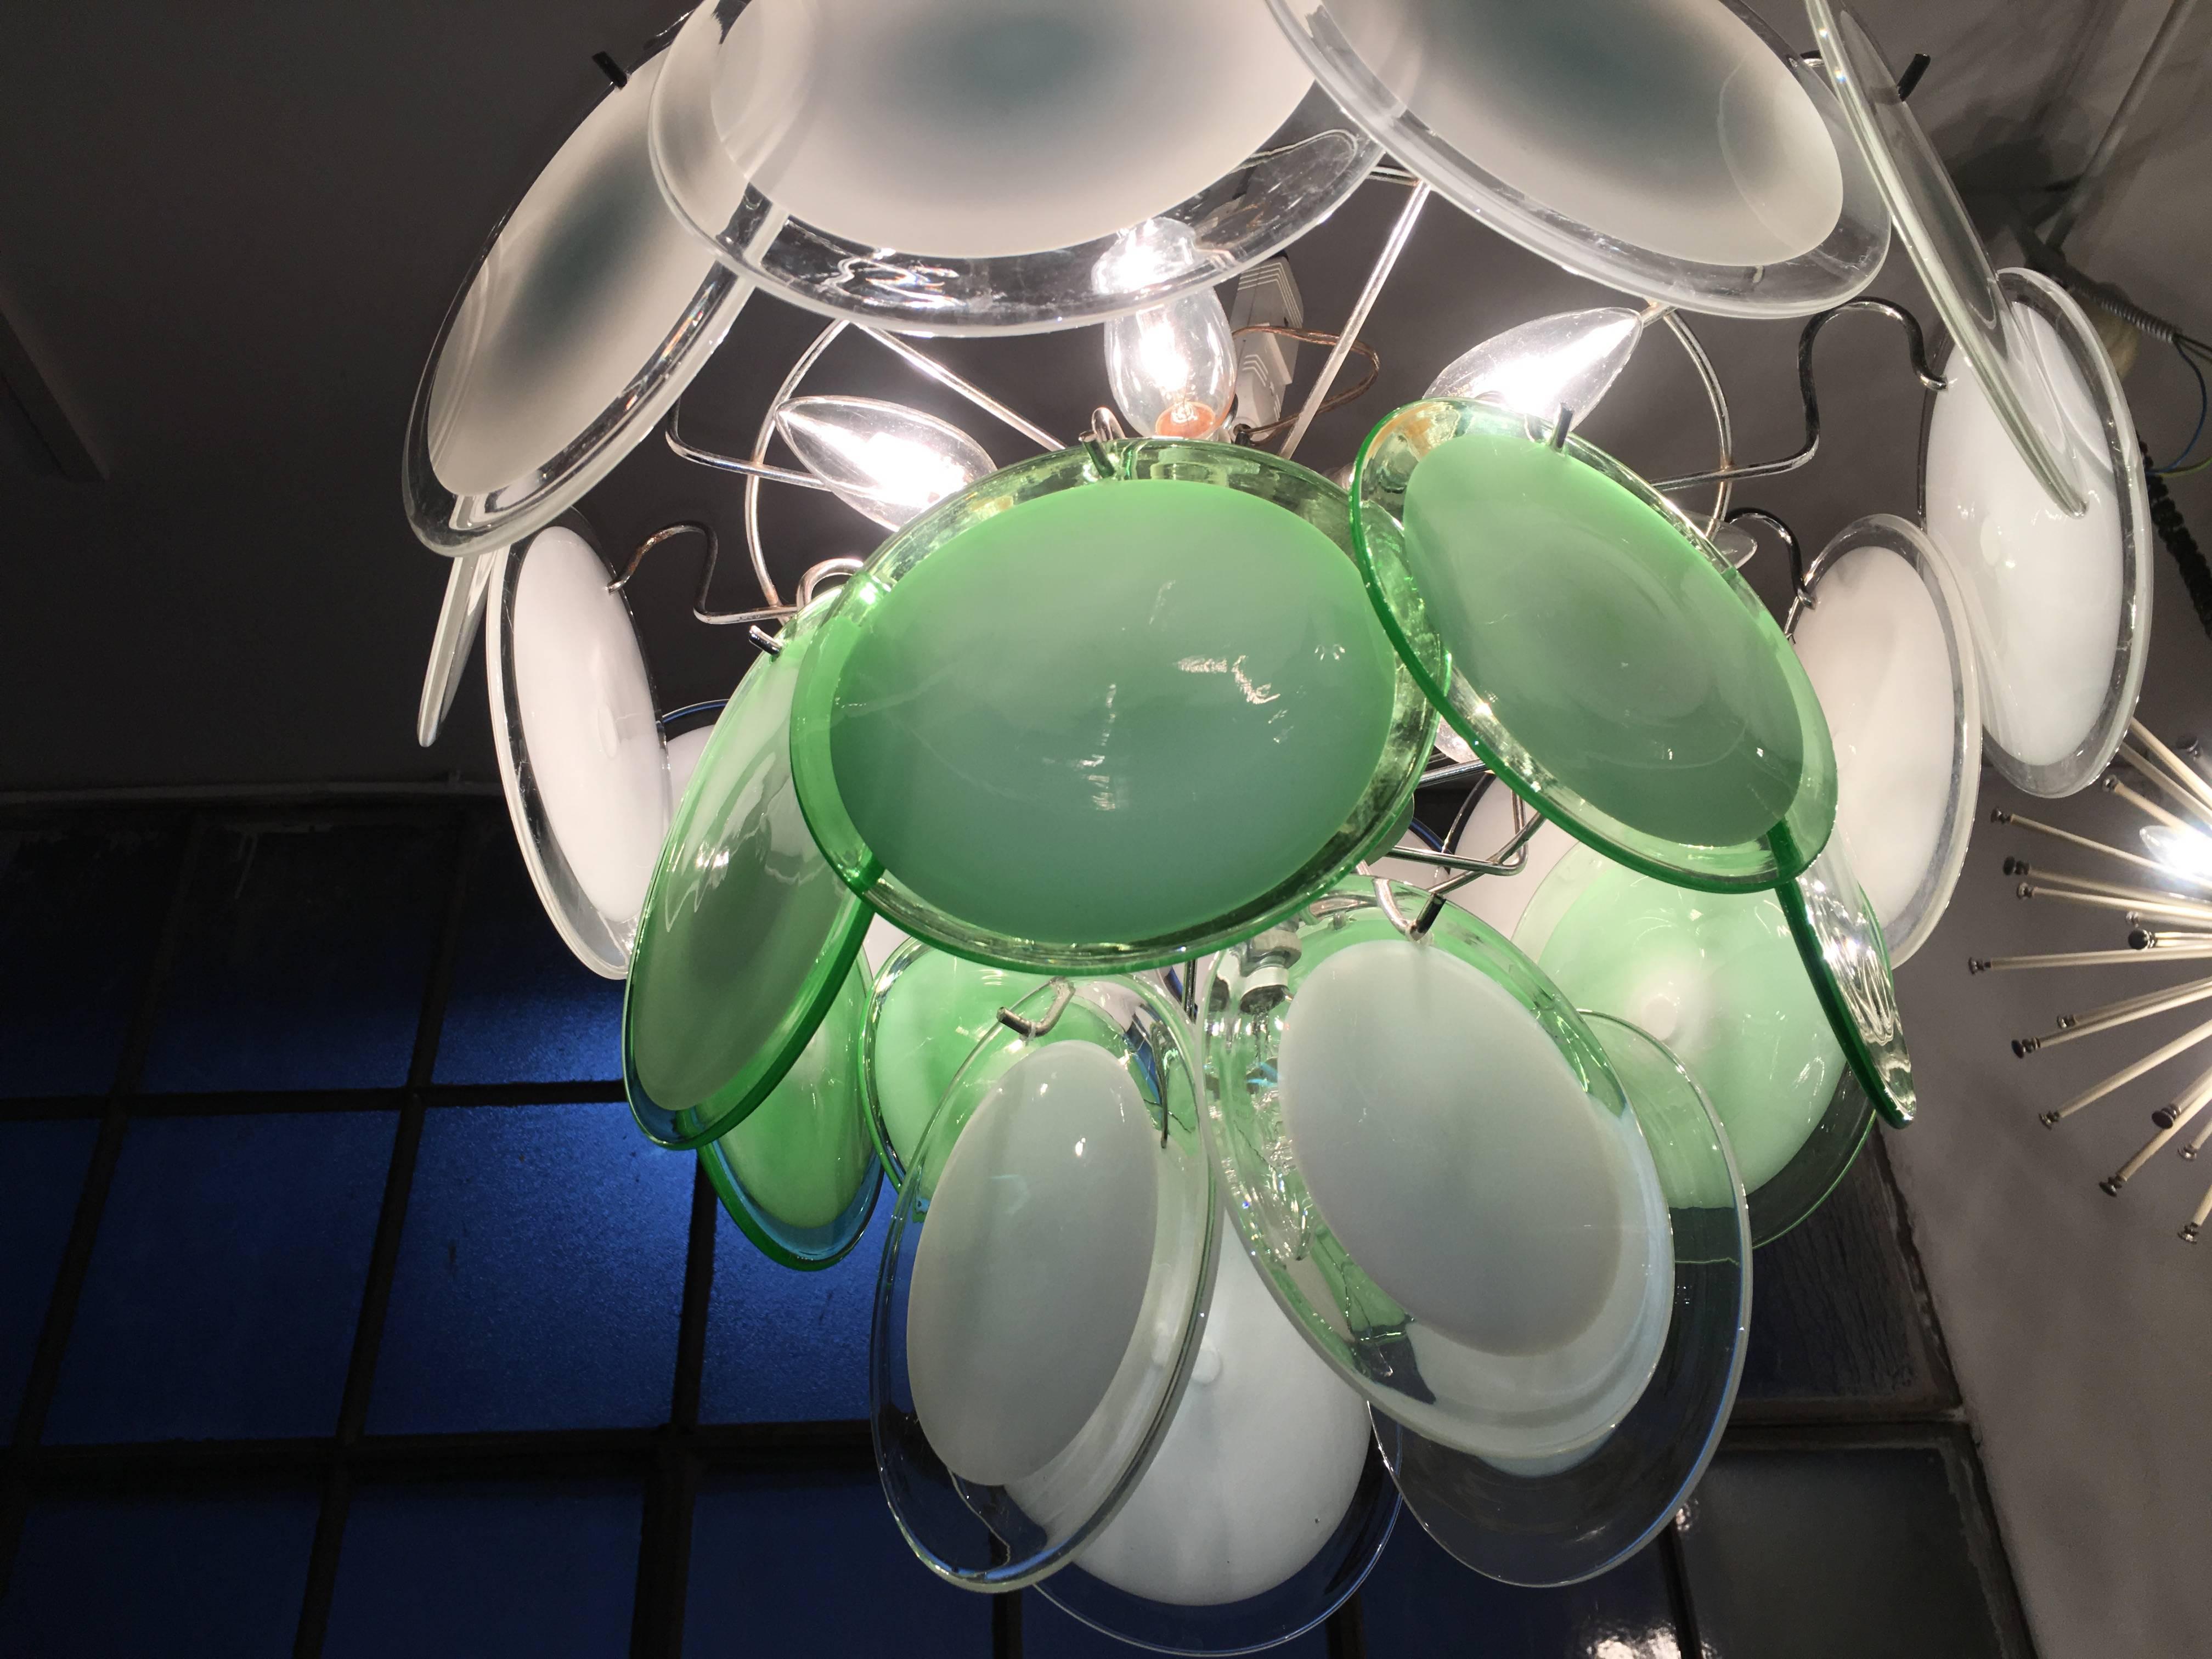 Lovely Pair of Green and White Murano Chandeliers by Vistosi, 1970s For Sale 1